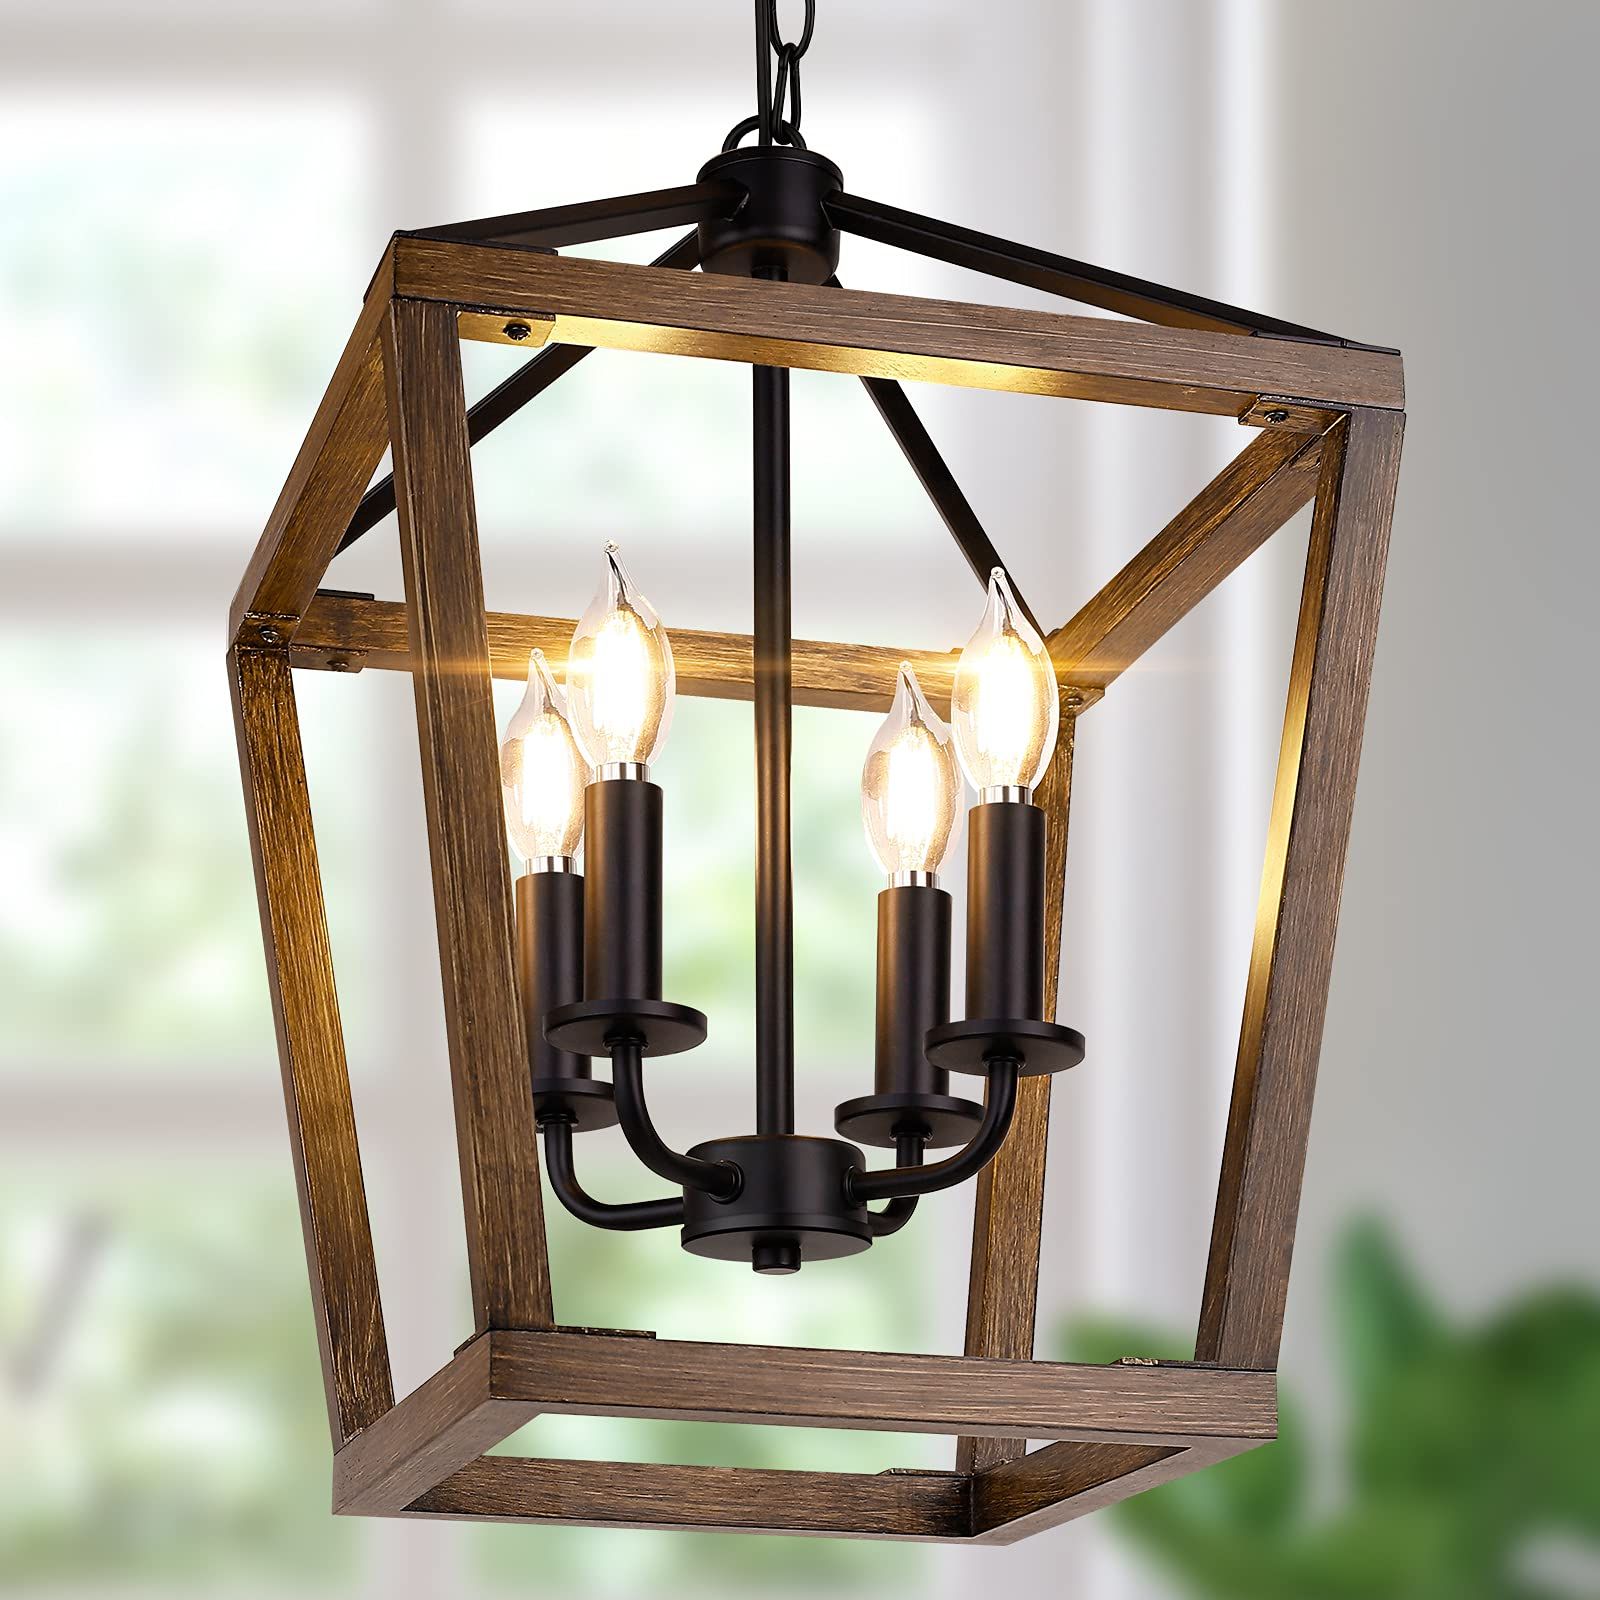 Adjustable Lantern Chandeliers For Popular Farmhouse Chandelier Light Fixture For Kitchen Dining Room, 4 Light Rustic  Pendant Hanging Ceiling Light Height Adjustable In Oak Wood Finish, Cage Lantern  Lighting With E12 Base For Hallway Foyer – – Amazon (View 4 of 15)